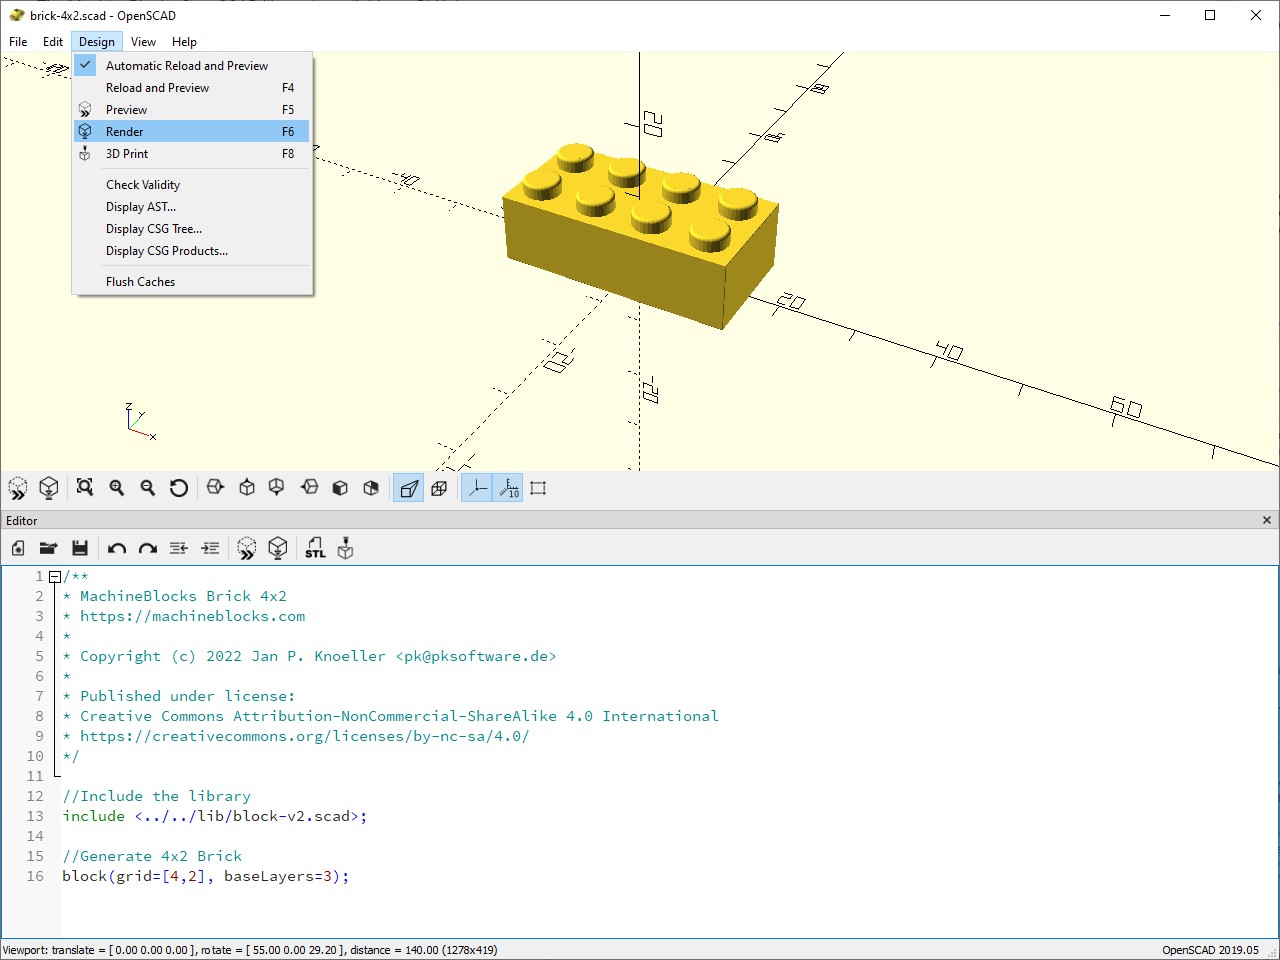 The model for the 3D printed LEGO brick is rendered in OpenSCAD